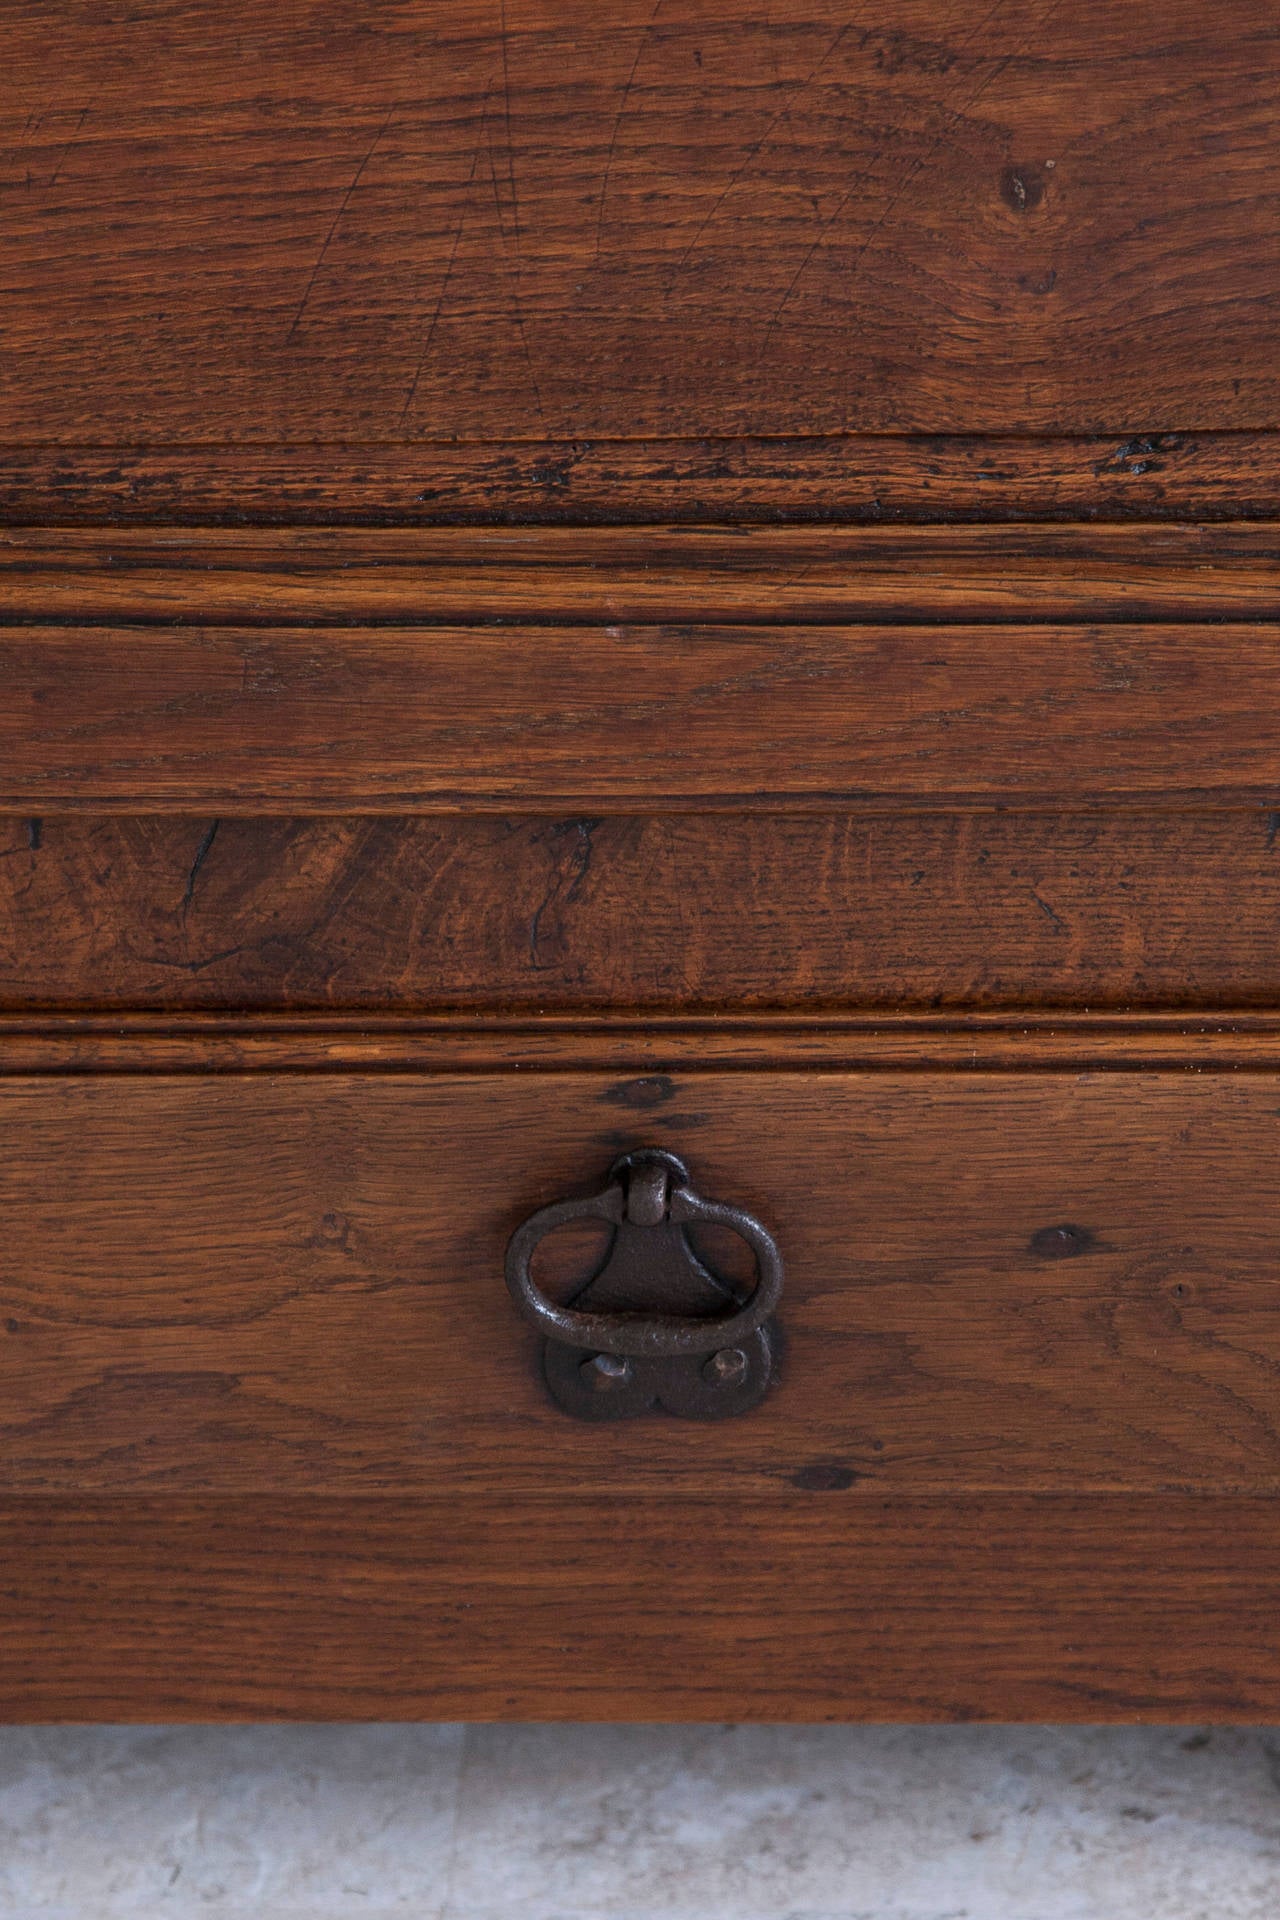 This Louis XIV period oak bonnetière has the incredible warmth that only age can bring. While the Sun King was building his famous chateau at Versailles, the Normandy artisans were adapting the symmetrical Louis XIV style to practical pieces to be